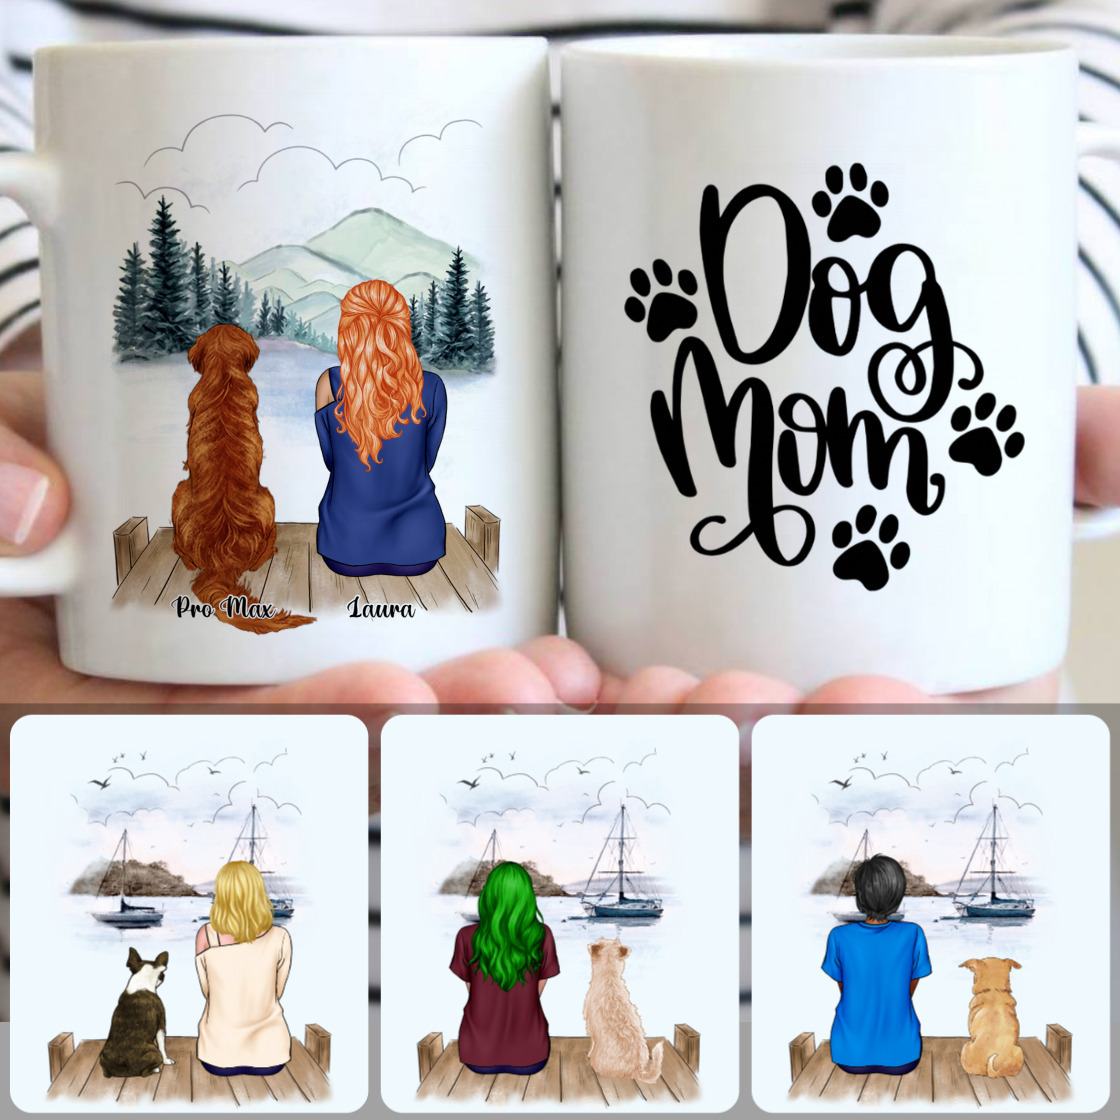 Personalized Mug, Meaningful Gifts For Dog Lovers, Girl & Dog Customized Coffee Mug With Names